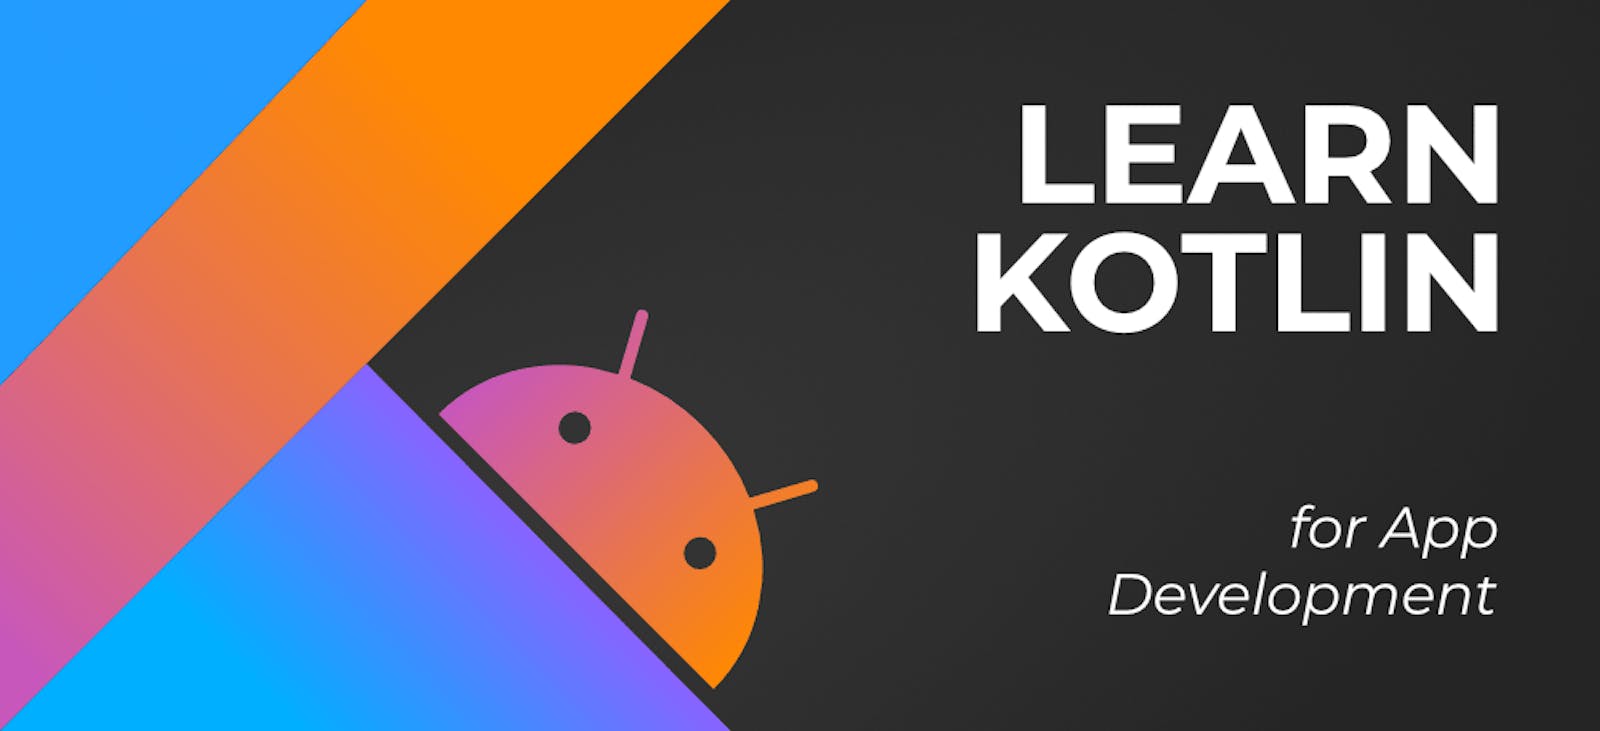 Why Kotlin for Android Development?